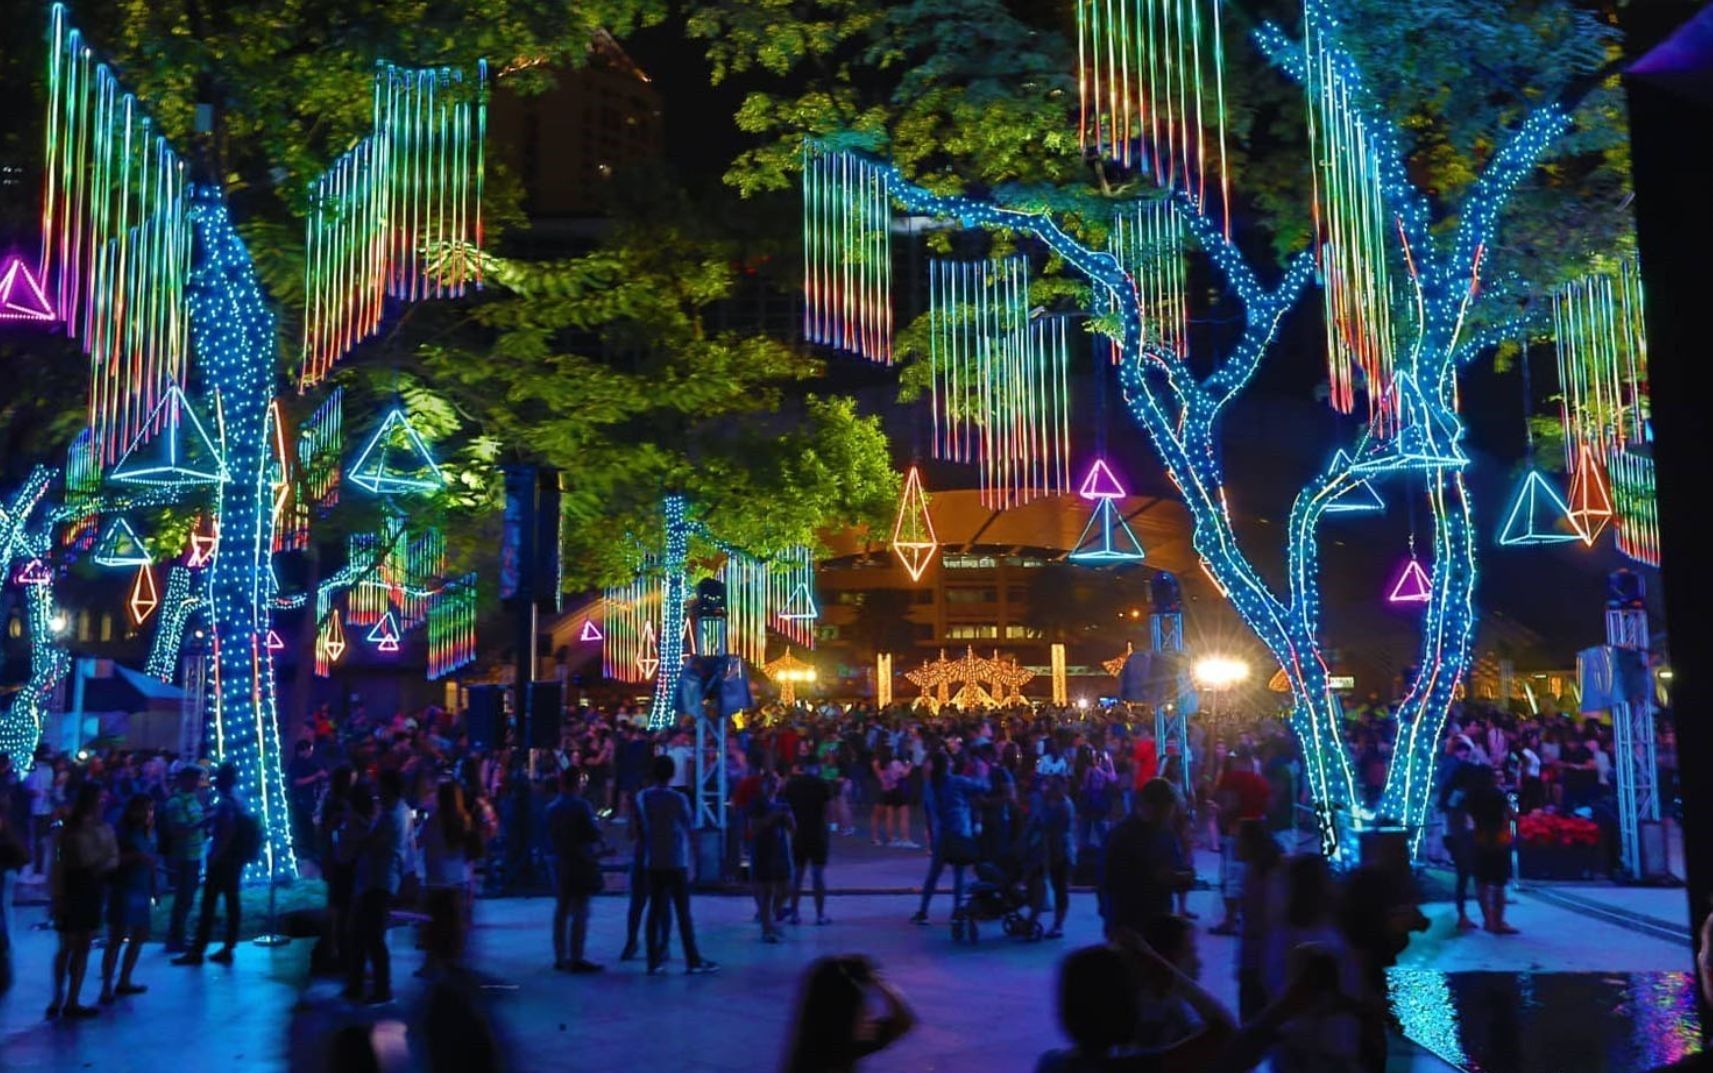 The Festival of Light at Ayala Triangle Gardens